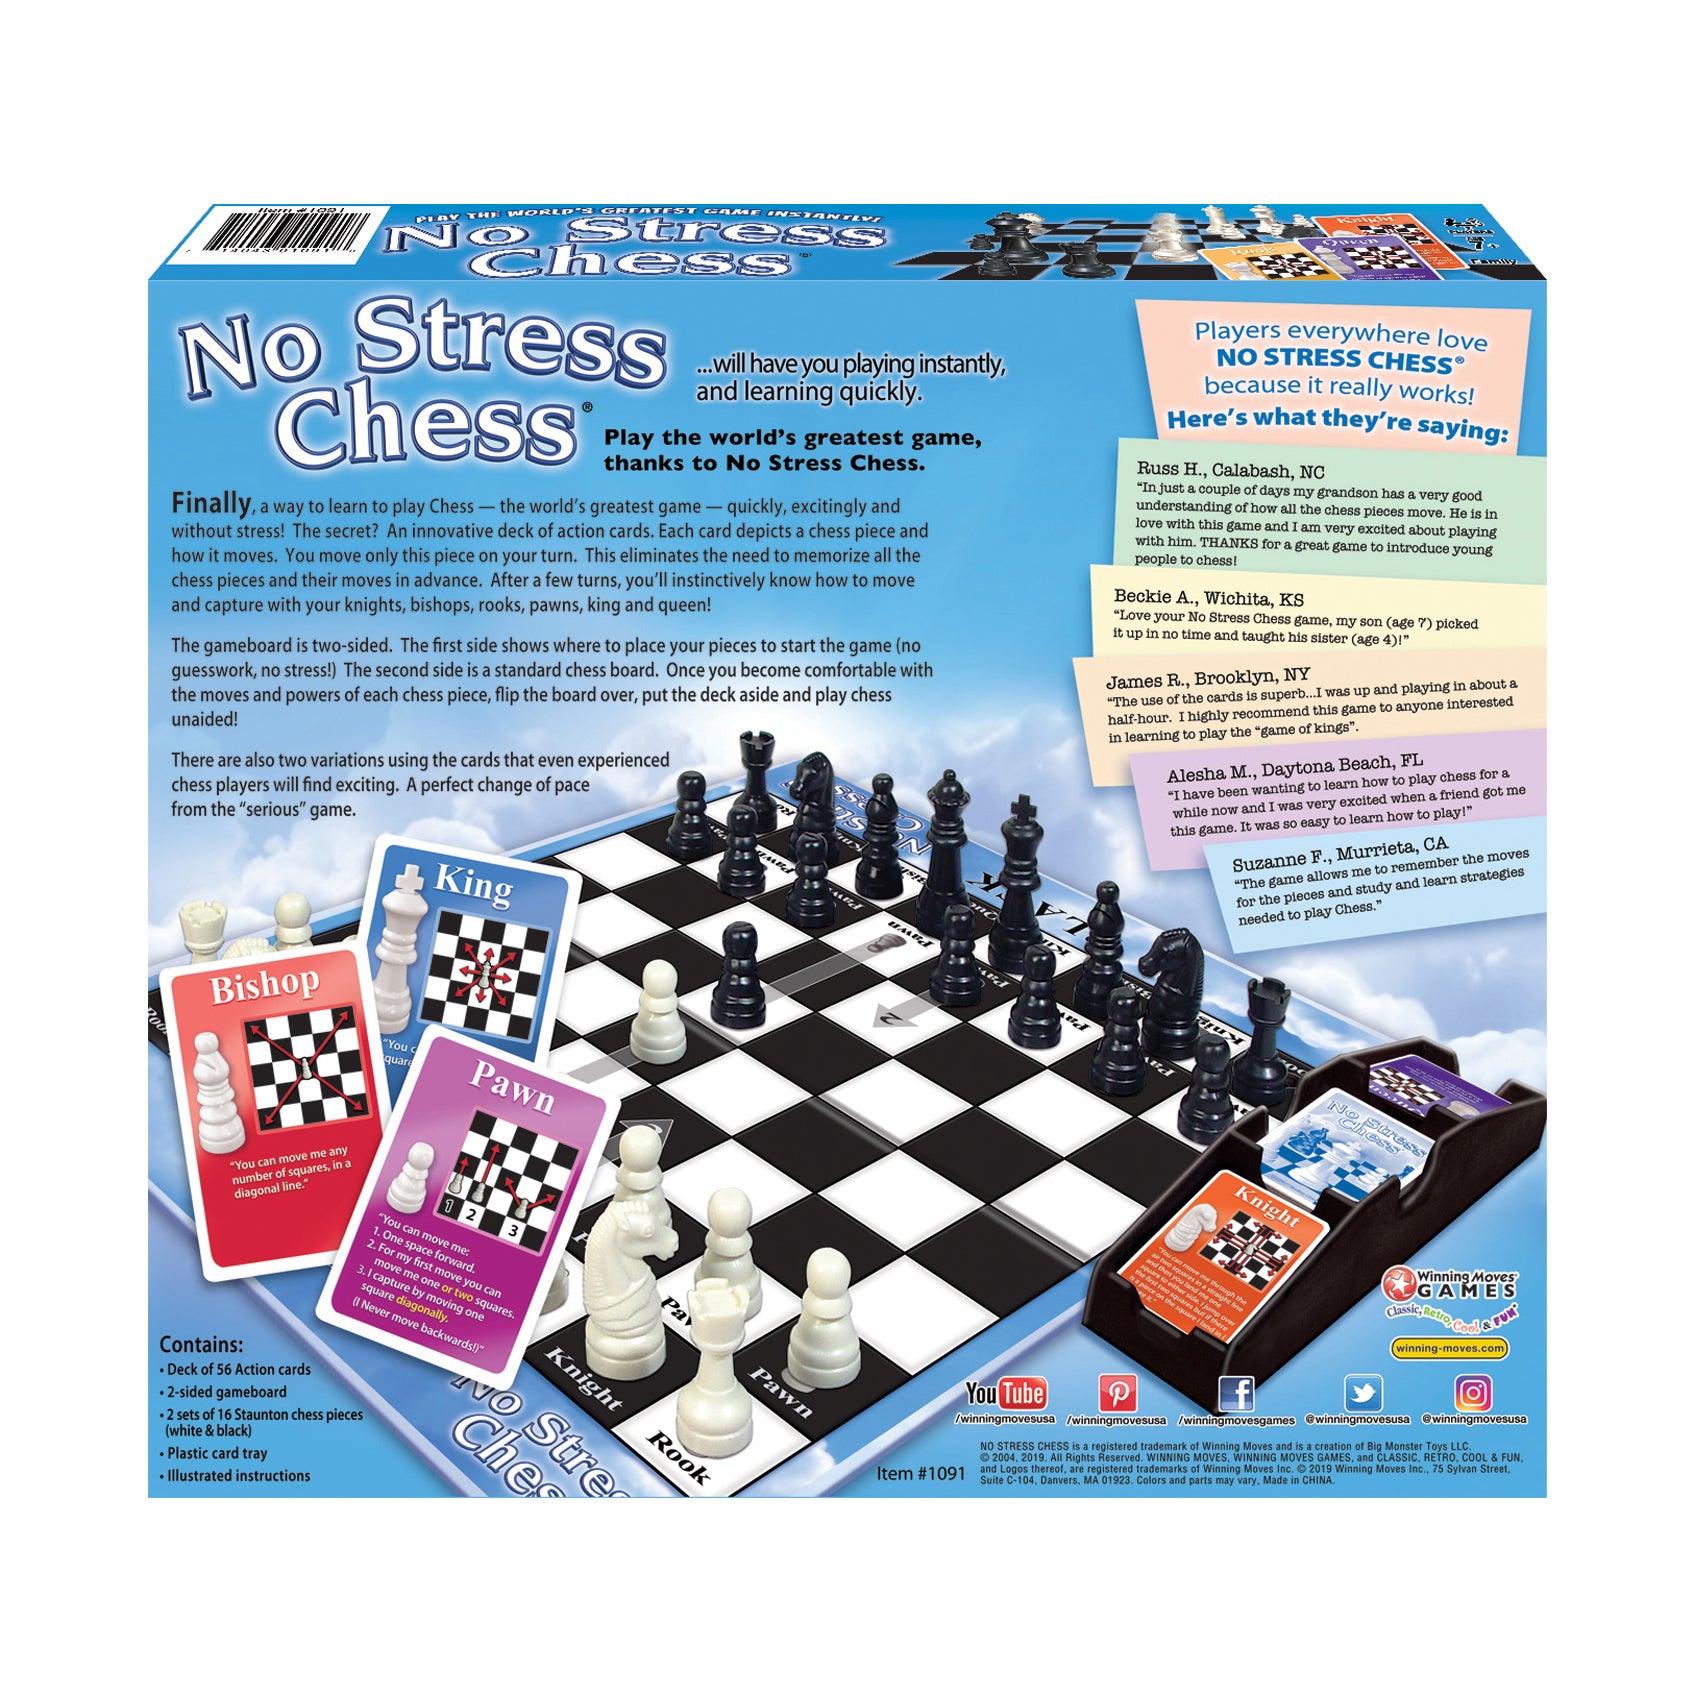  Chess Game Rules Instruction, Board Set up & Movement